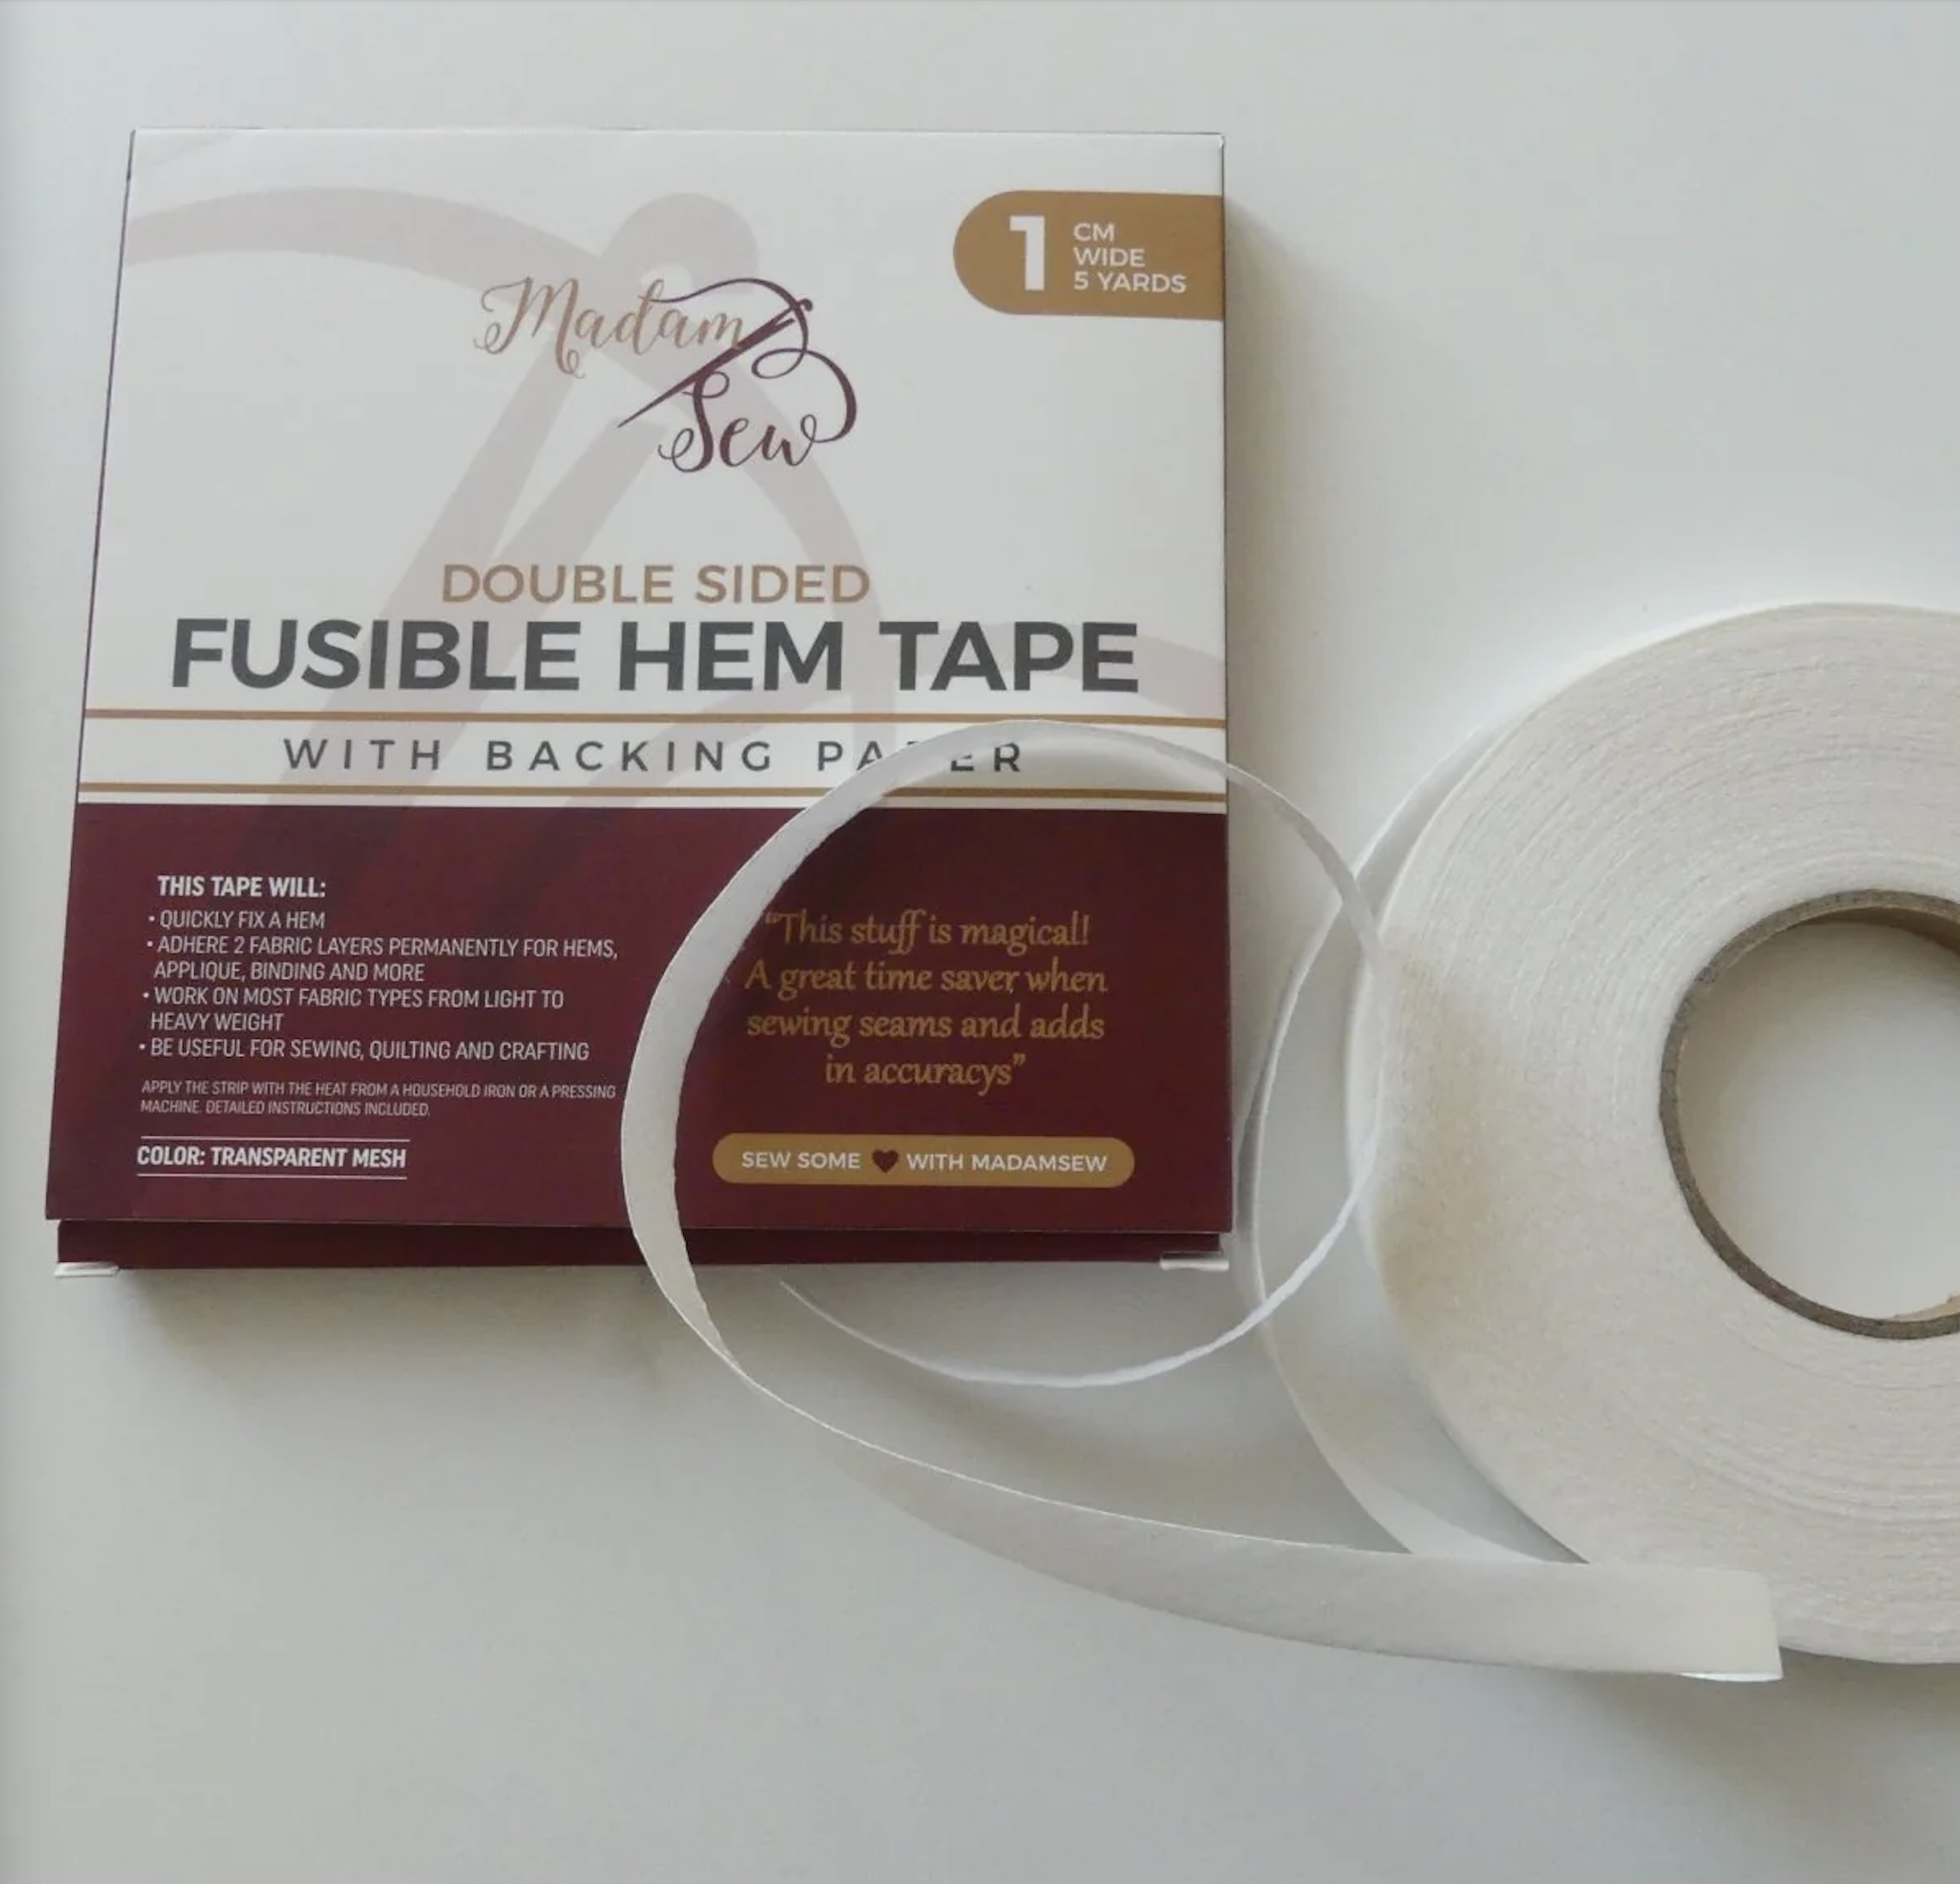 Fusible Hem Tape by Madam Sew - Package and Roll of Tape Image - Quiltblox.com